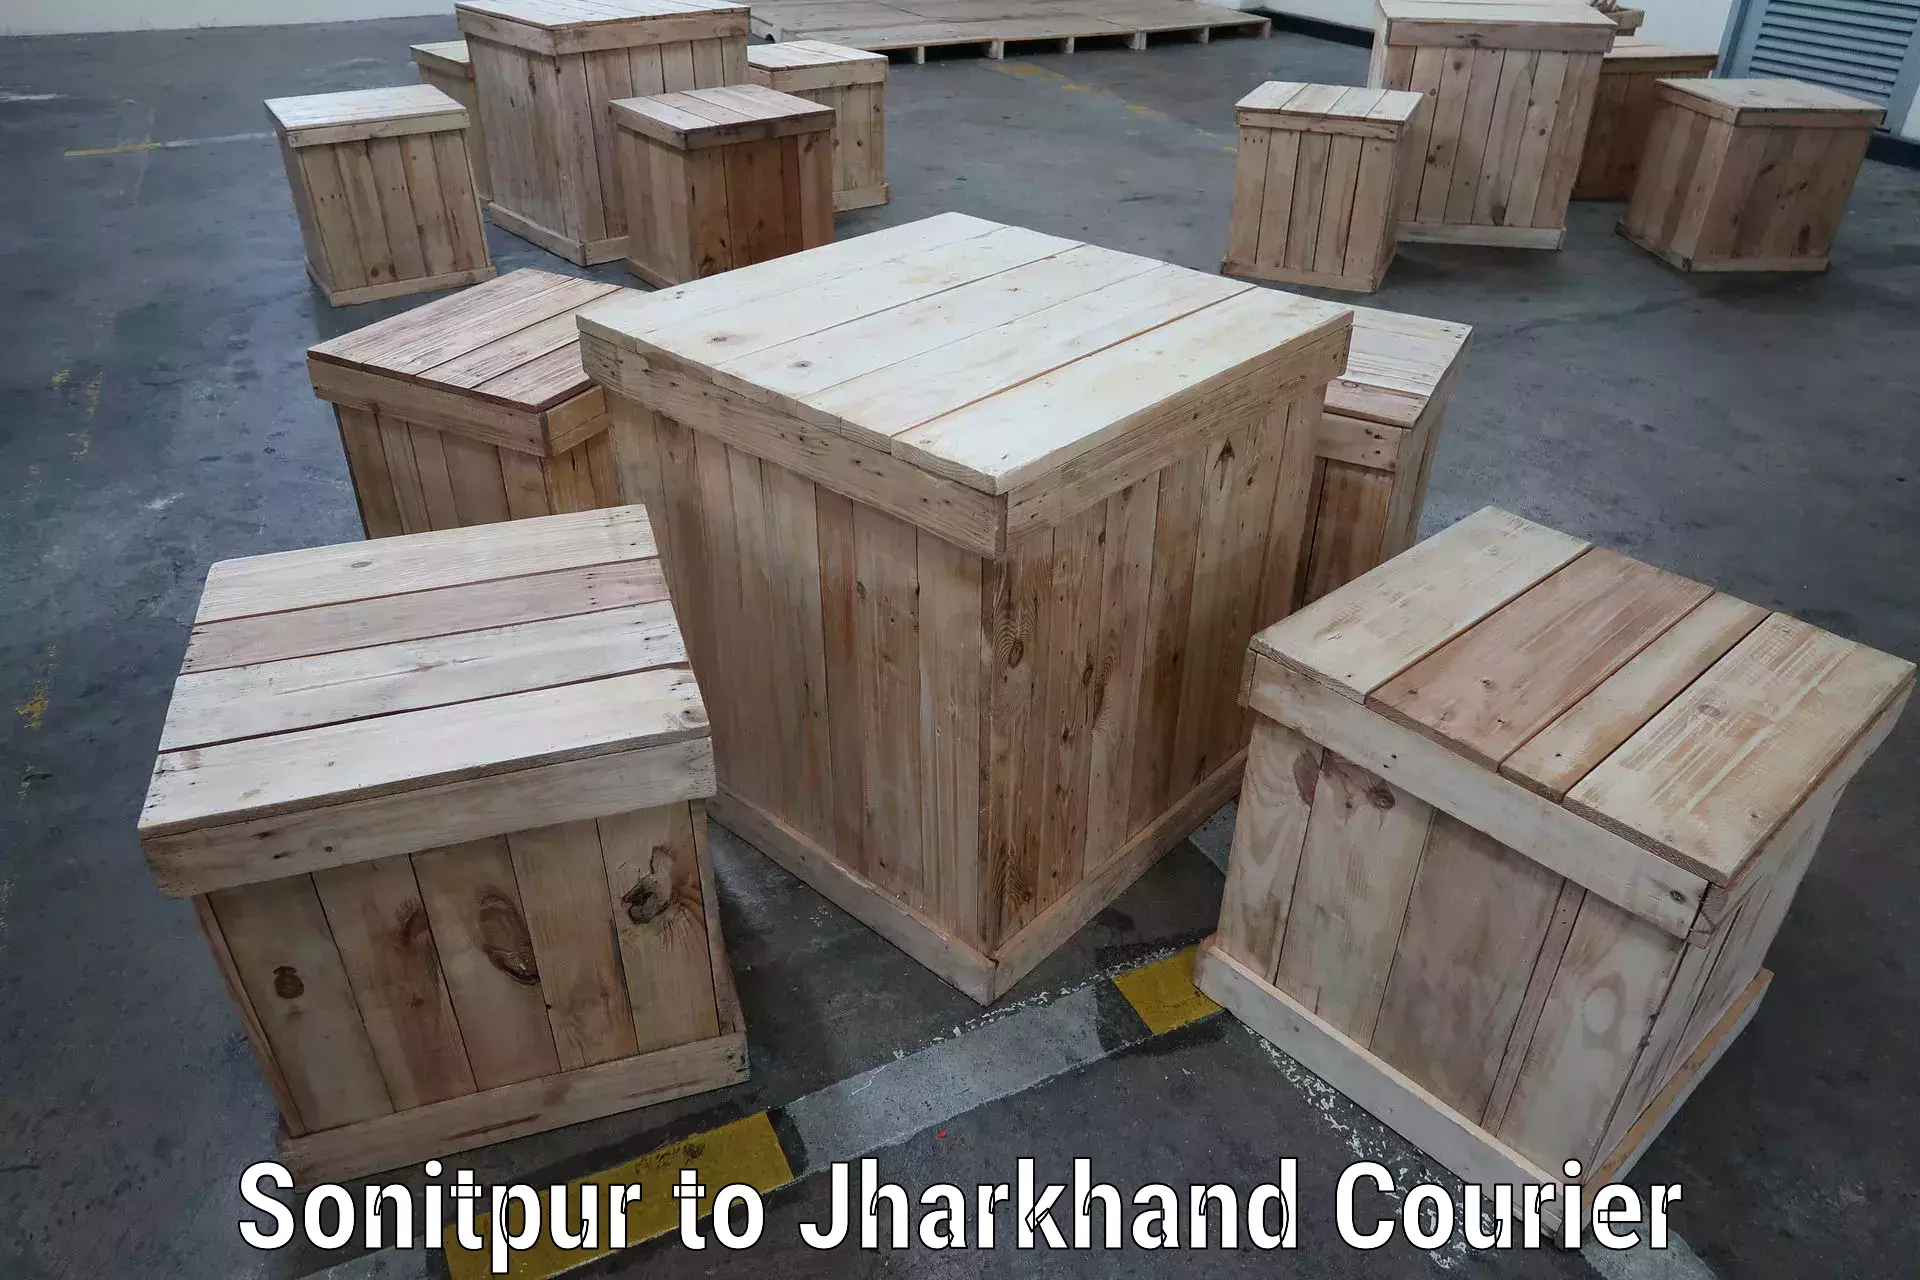 Global shipping solutions in Sonitpur to Jharkhand